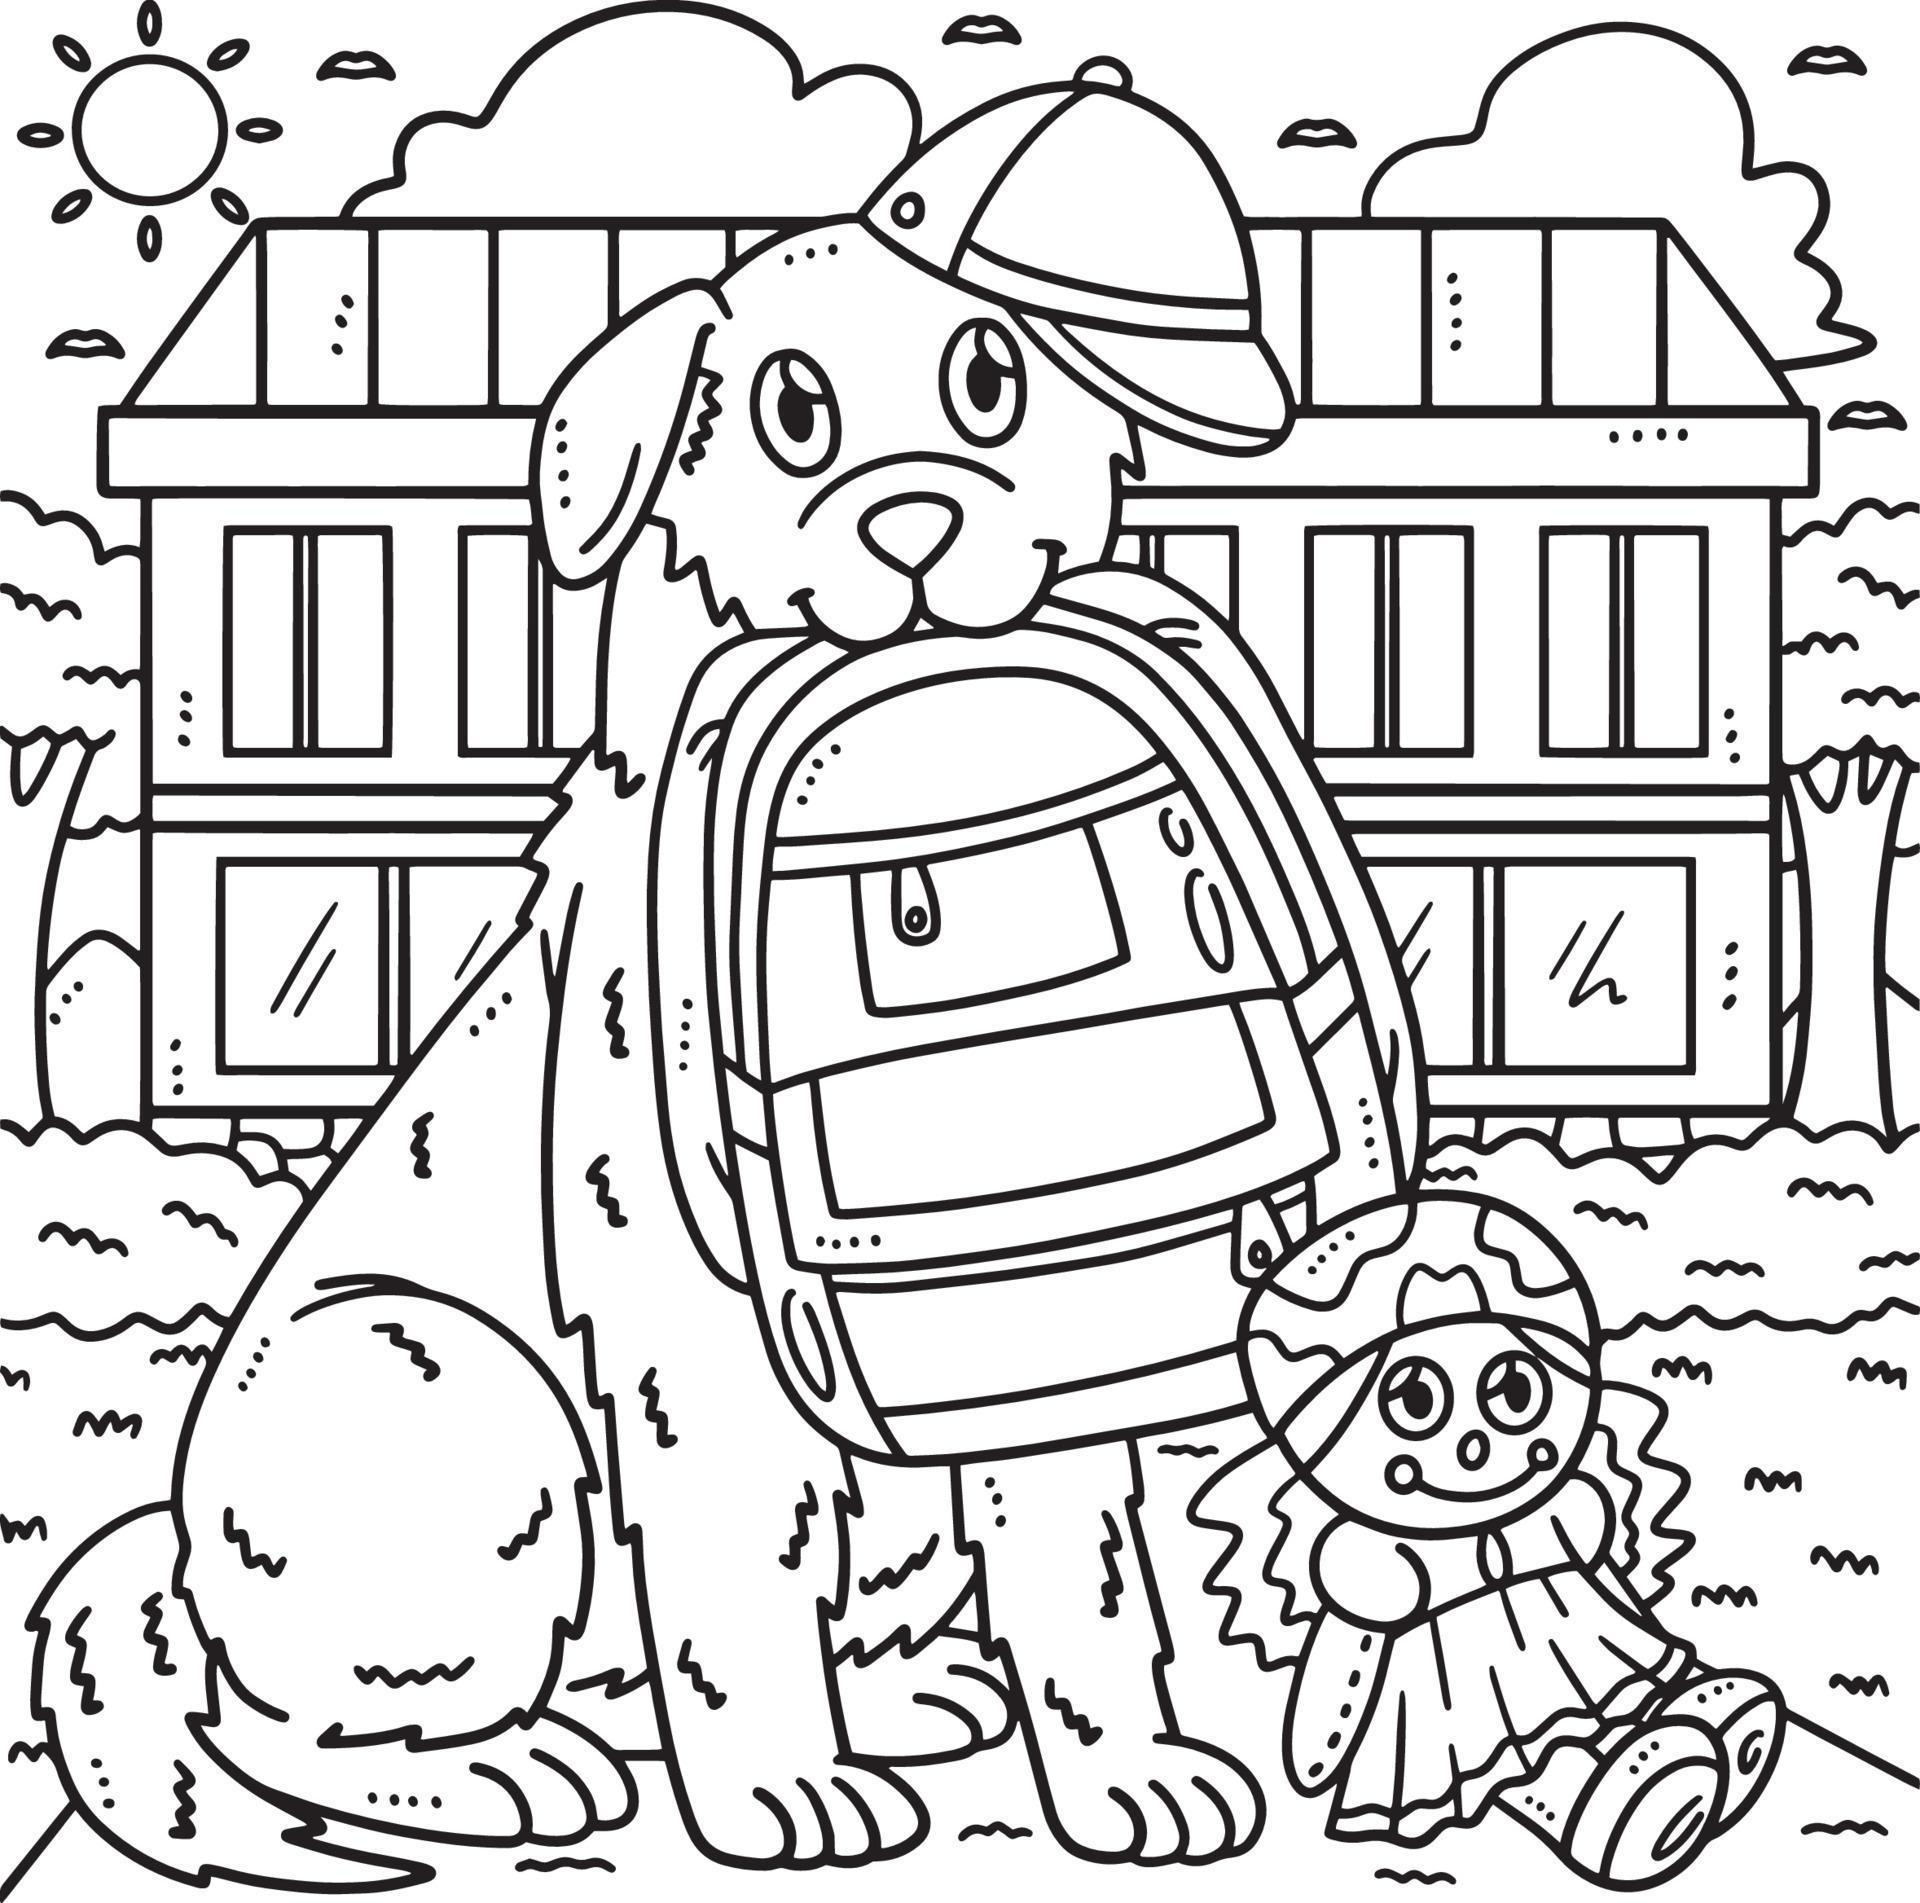 last-day-of-pre-k-dog-holding-school-bag-coloring-21501561-vector-art-at-vecteezy